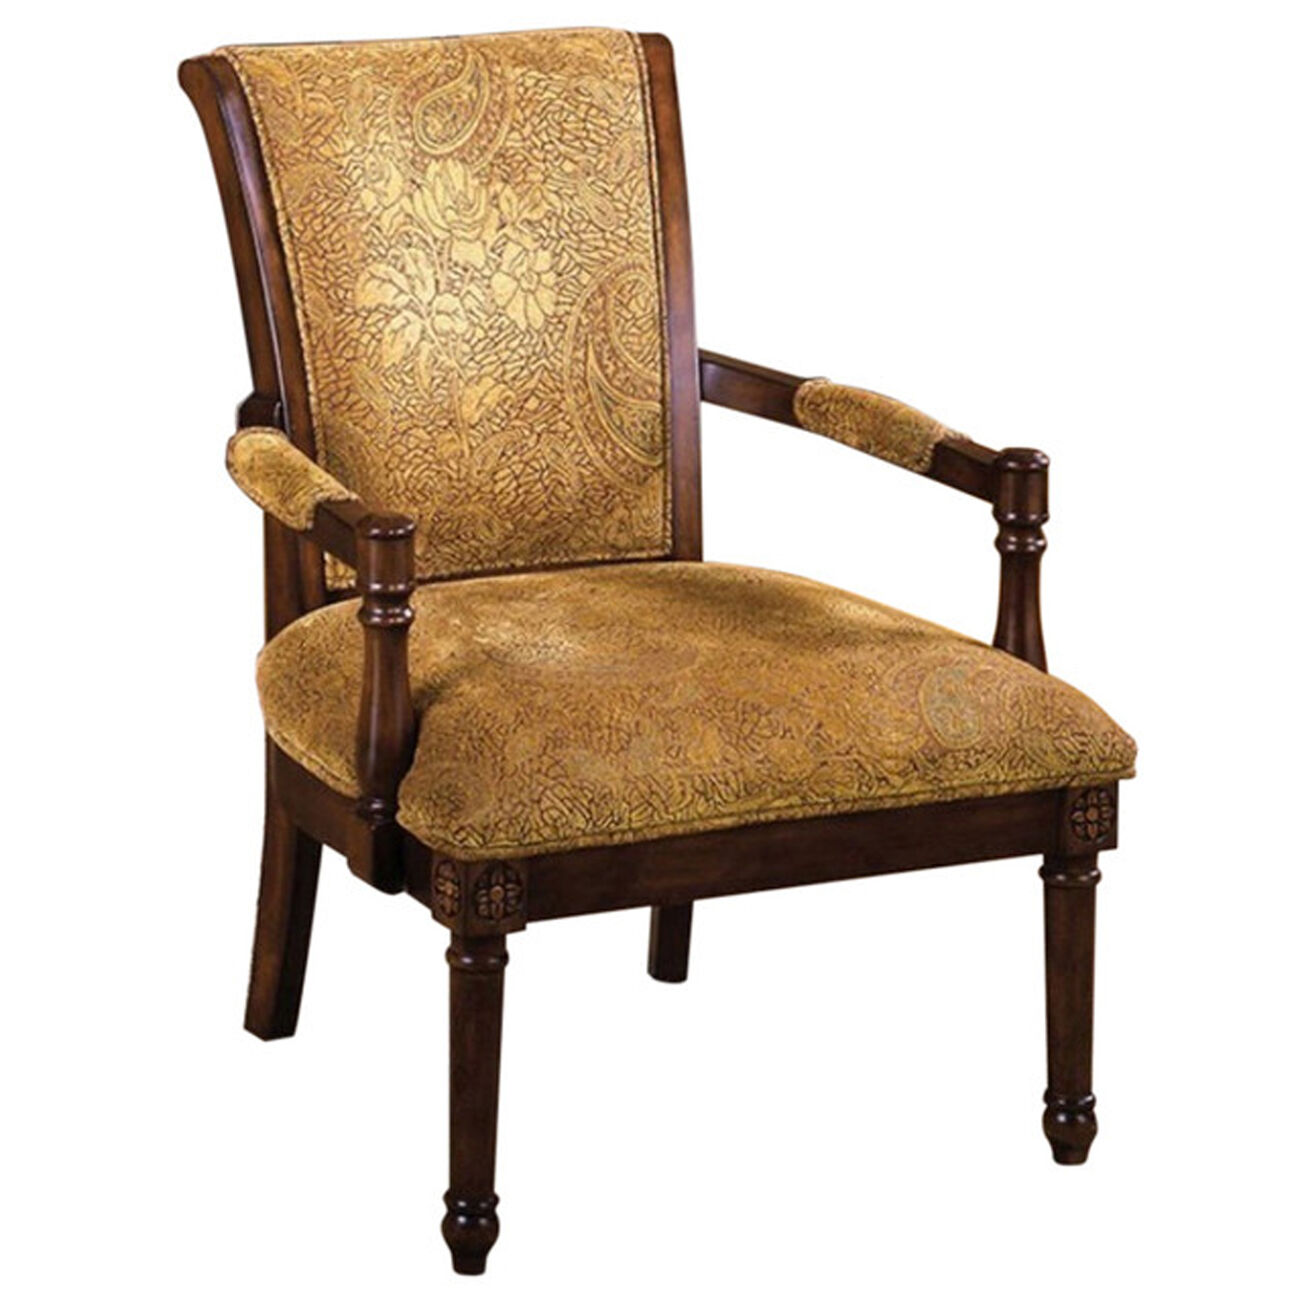 Stockton Traditional Occasional Chair, Antique Oak